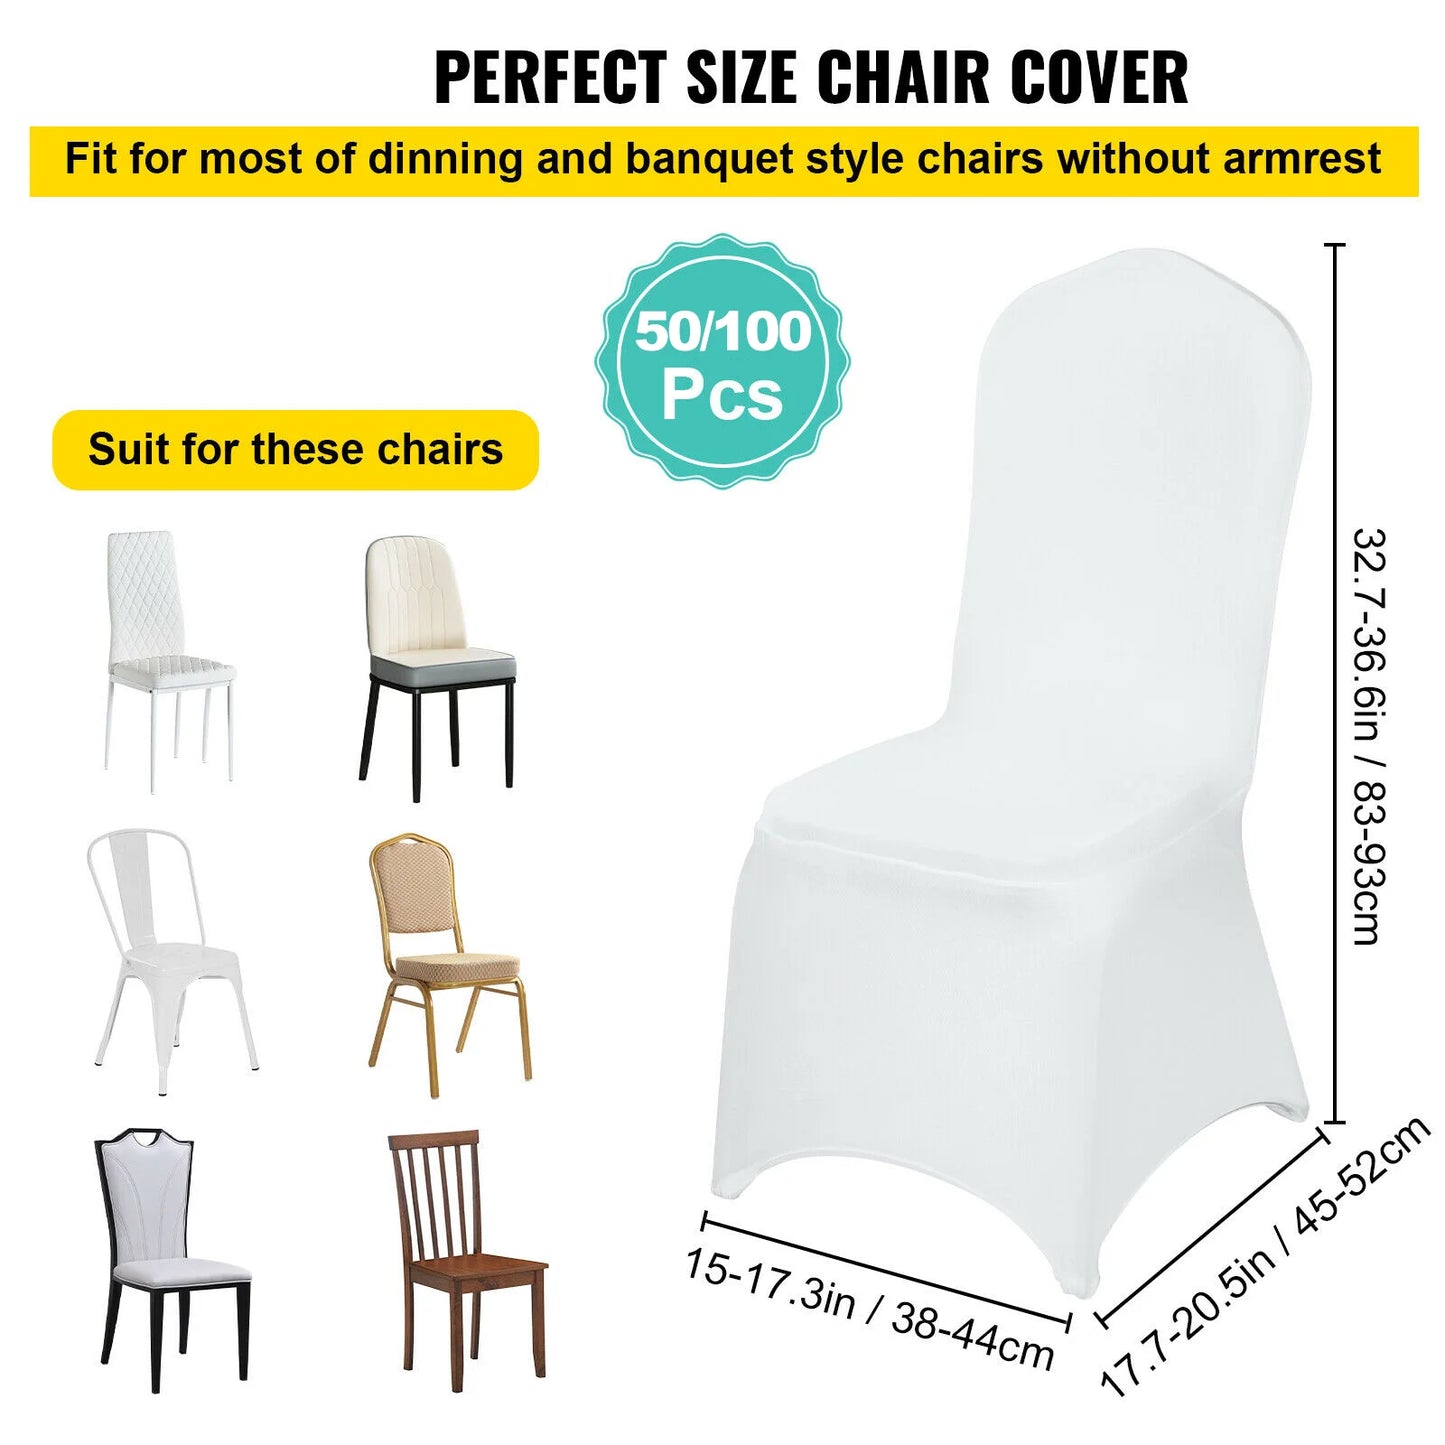 VEVOR 50 100Pcs Wedding Chair Covers Spandex Stretch Slipcover for Restaurant Banquet Hotel Dining Party Universal Chair Cover